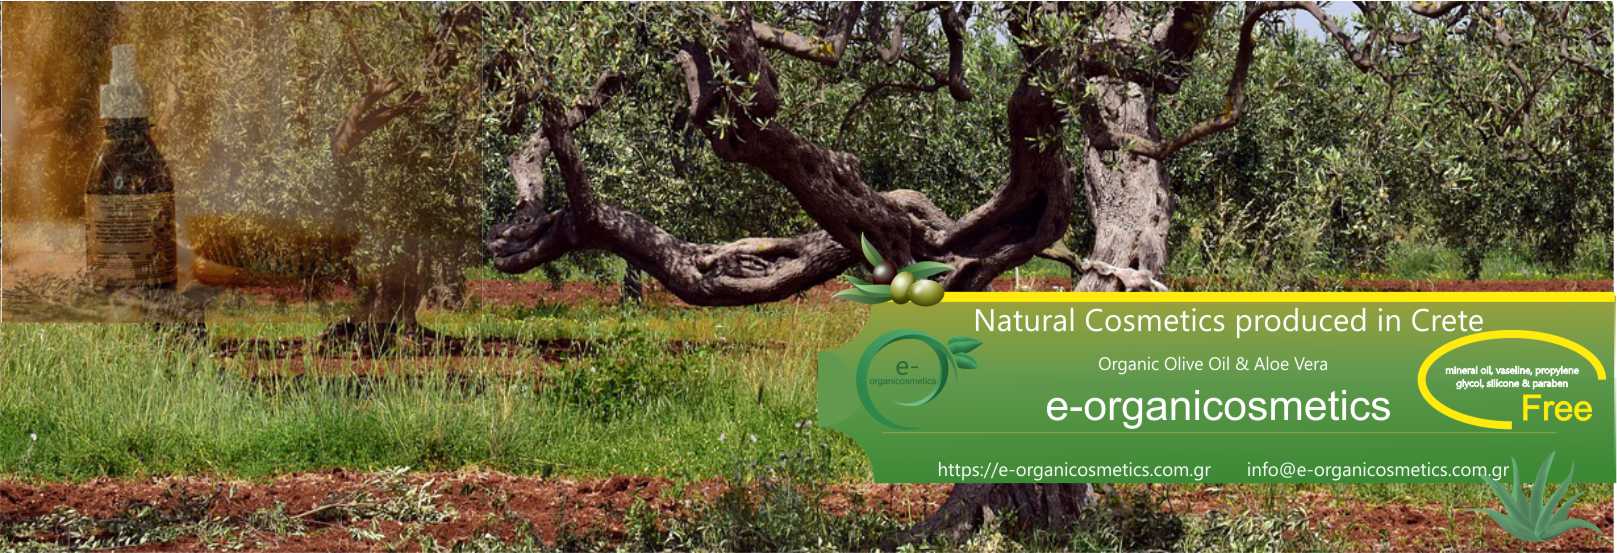 Natural Cosmetics Produced in Island of Crete